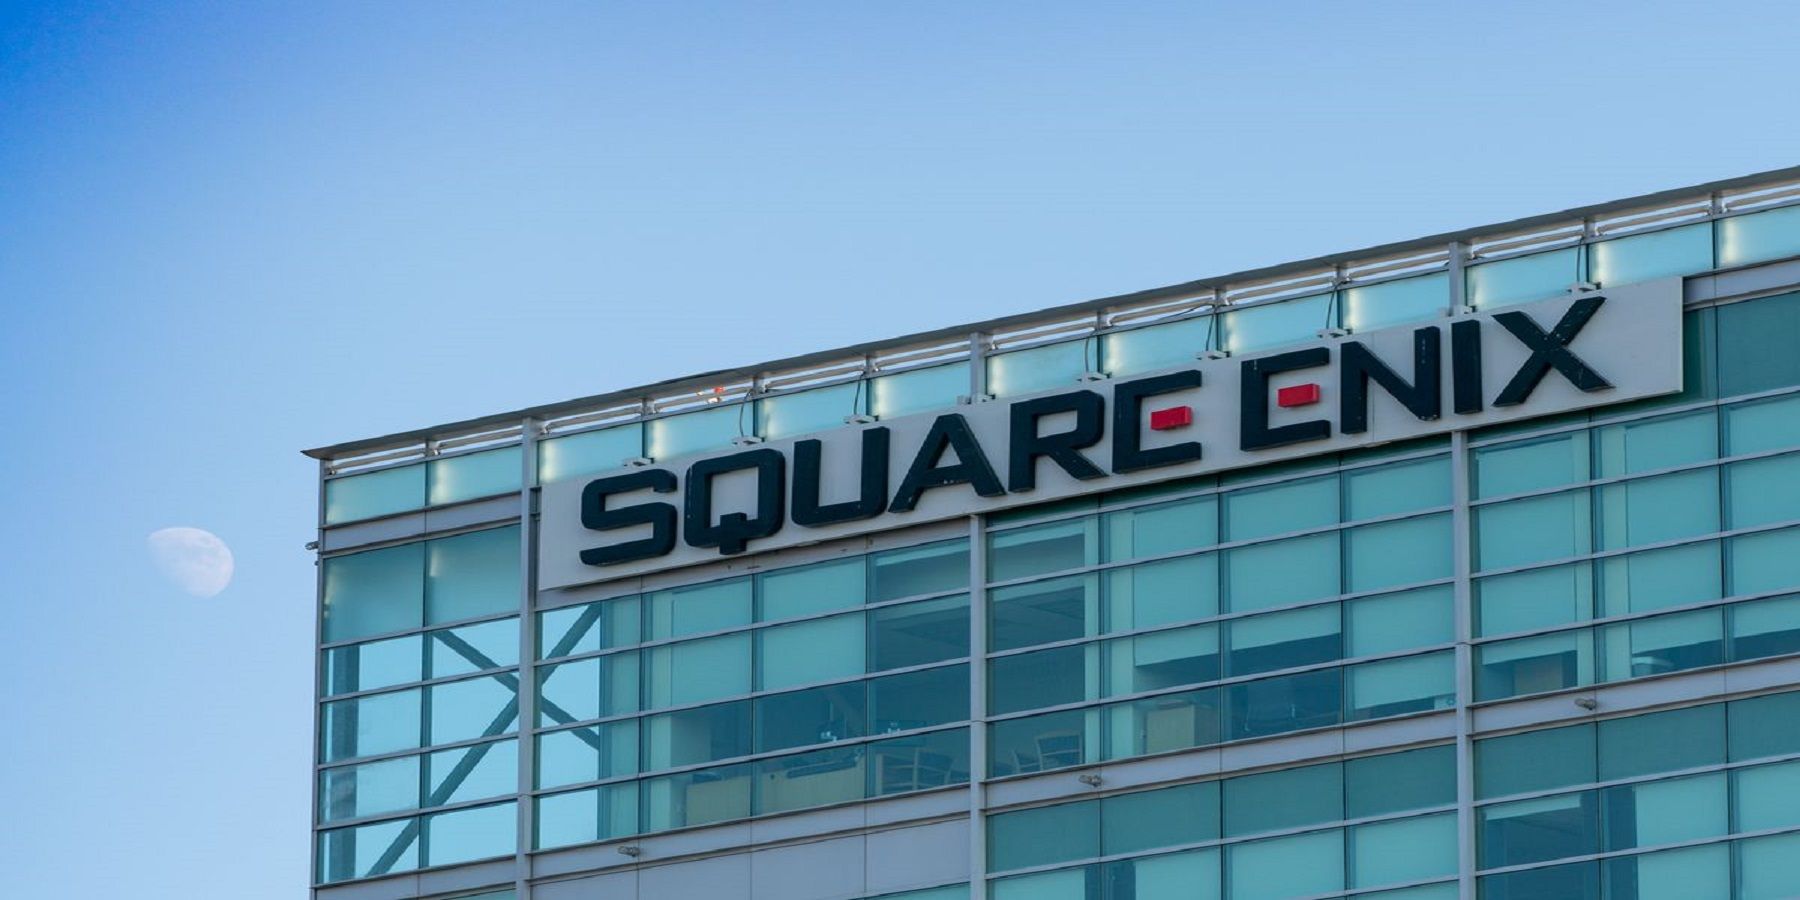 Square Enix is looking to expand its studio roster according to its recent financial report.